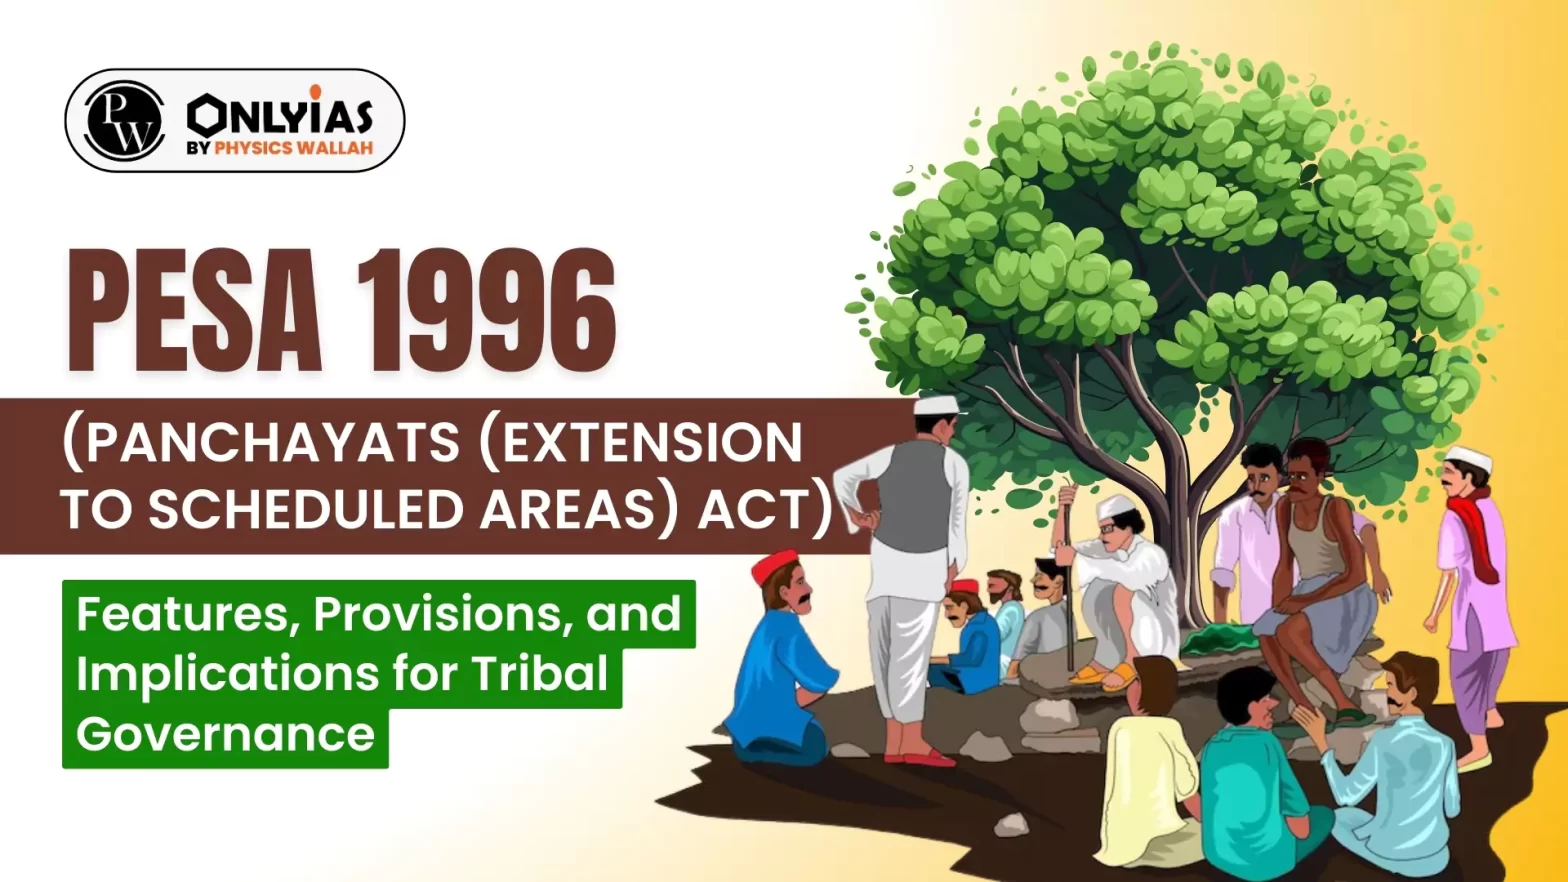 PESA 1996 (Panchayats (Extension to Scheduled Areas) Act): Features, Provisions, and Implications for Tribal Governance